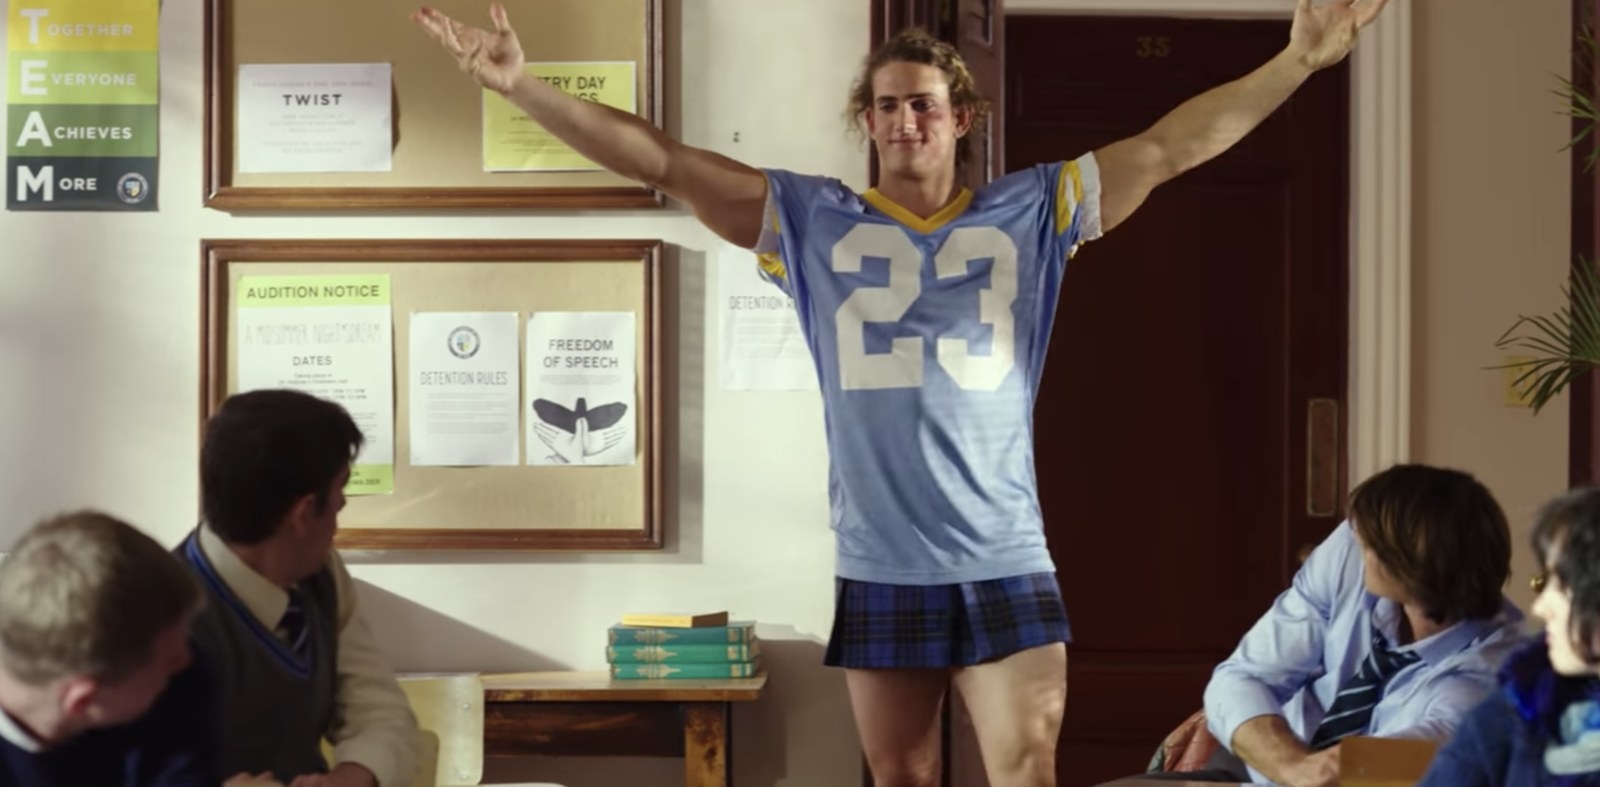 From &quot;The Kissing Booth&quot; image shows a teenaged boy in a jersey, wearing a plaid mini skirt and smiling.